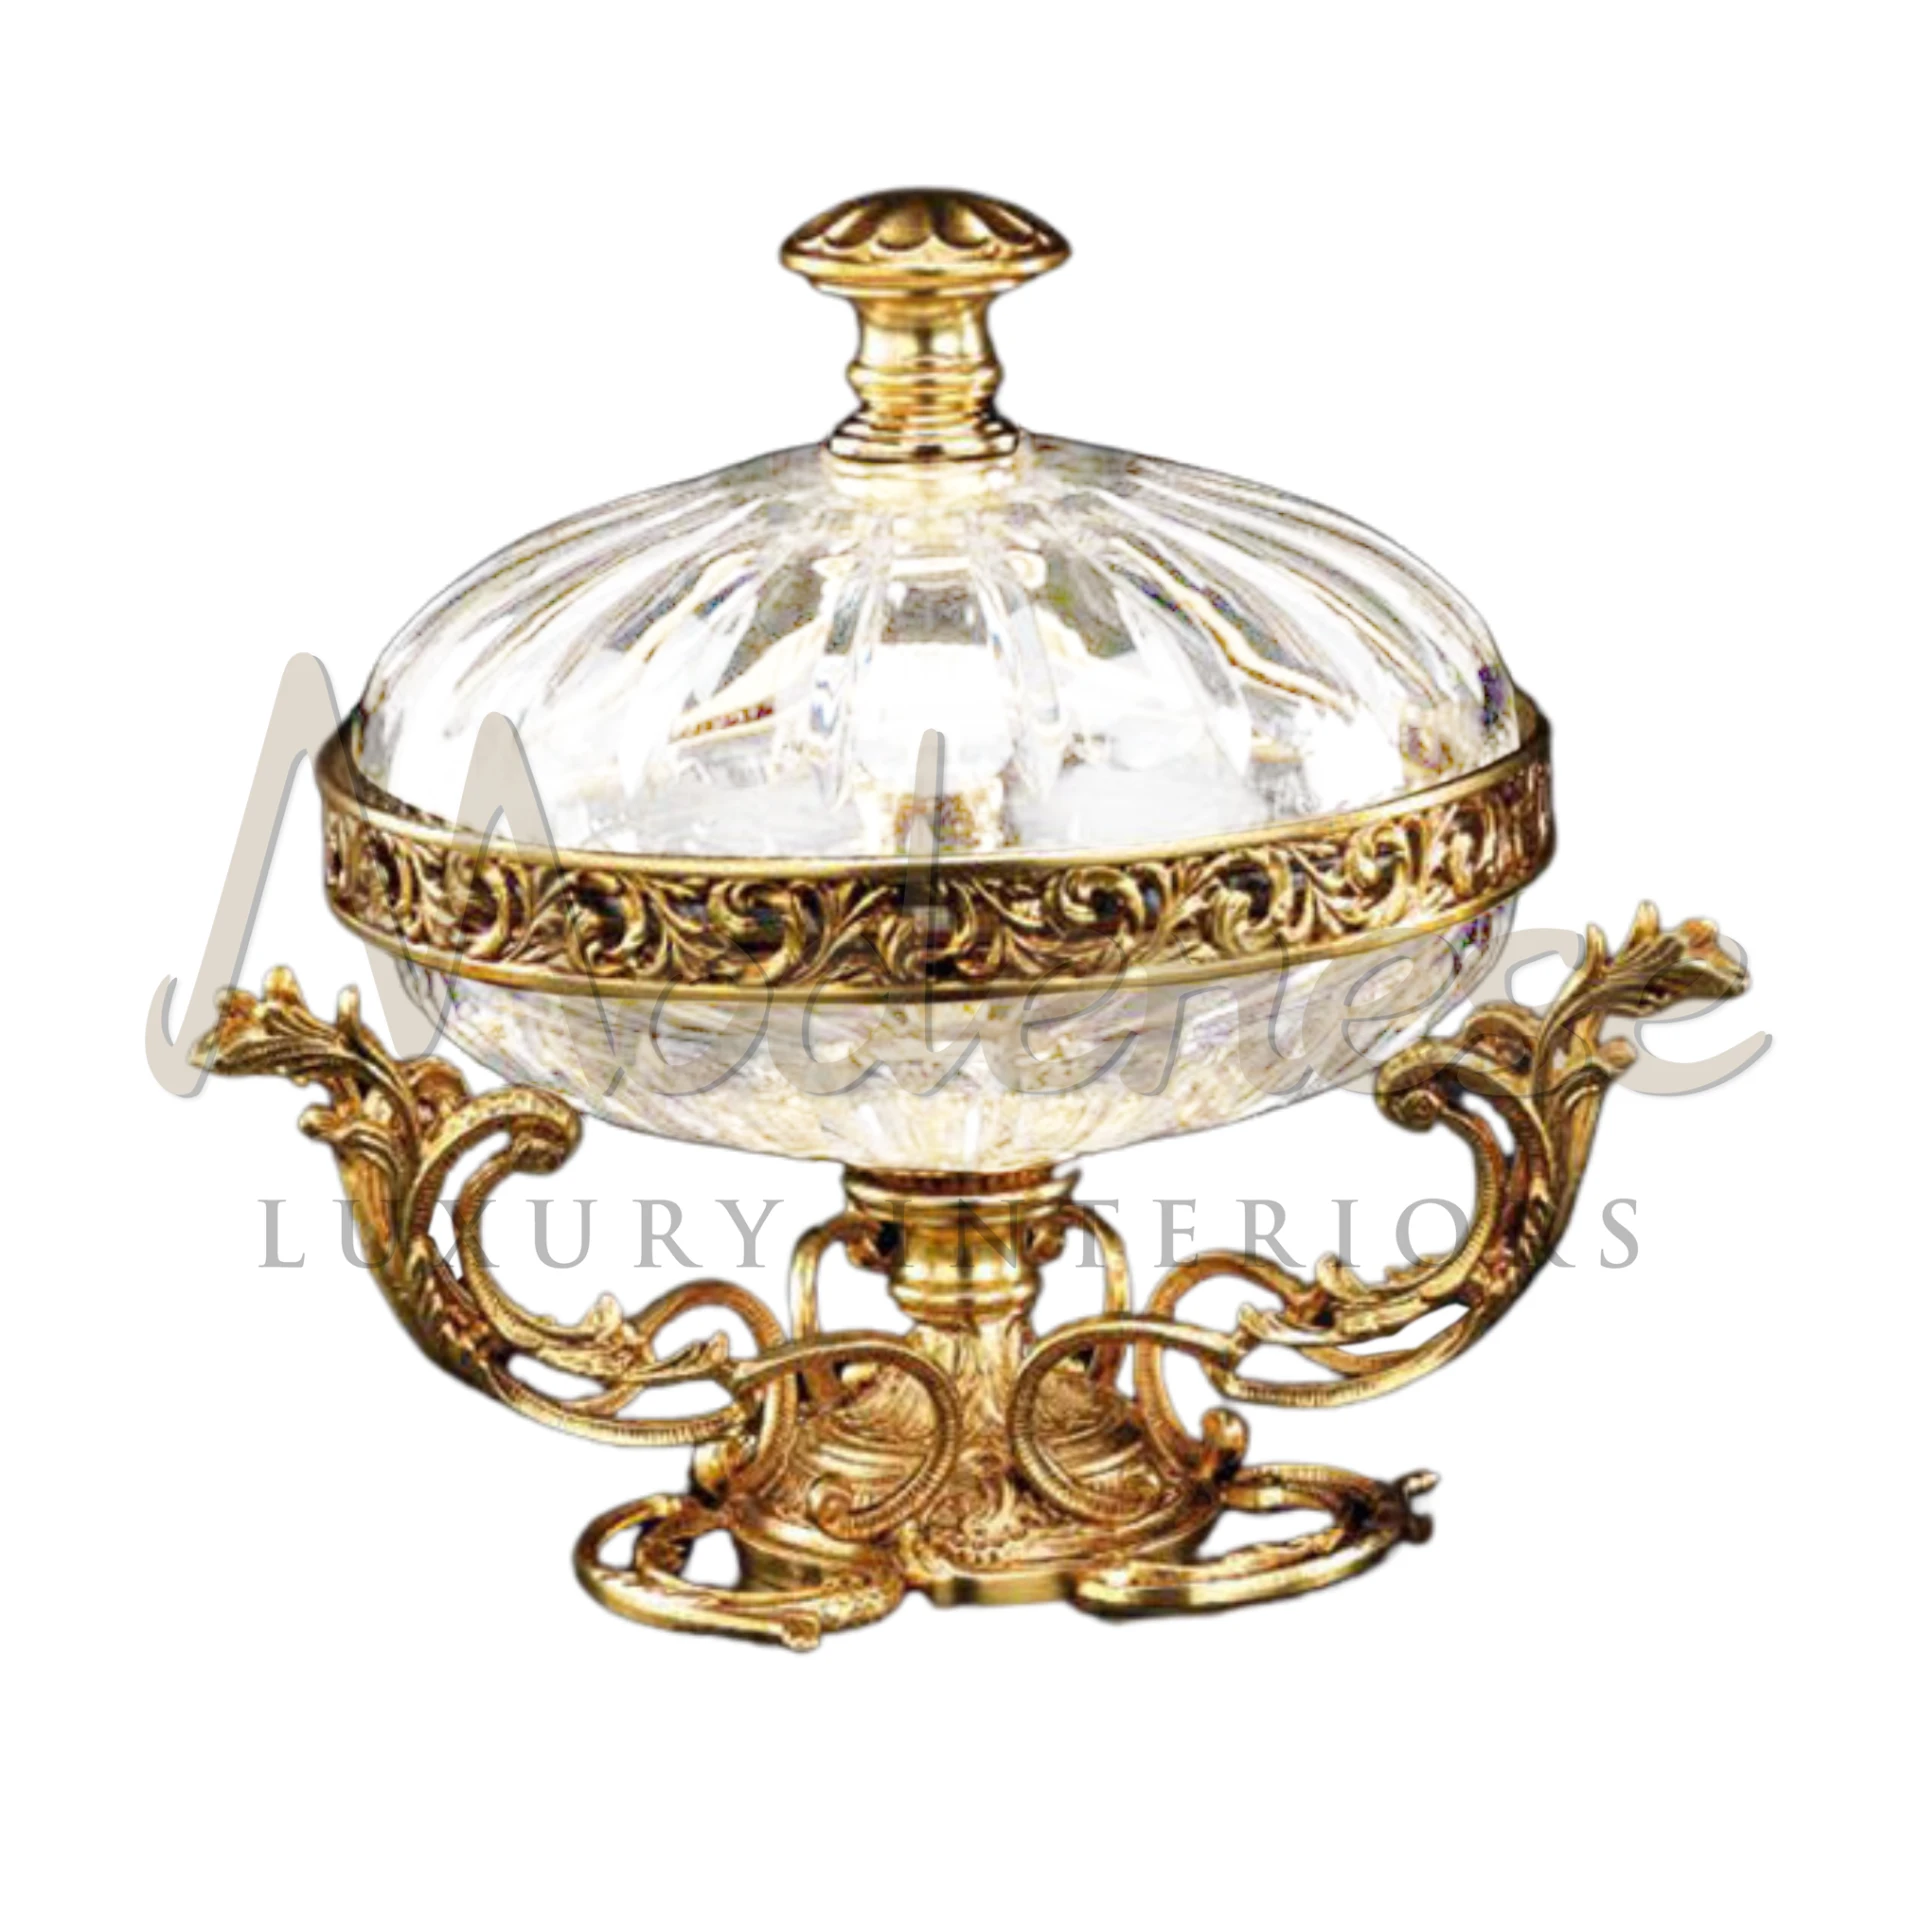 Royal Classical Bowl, an elegant glass vase with gold details, enhancing room aesthetics with its sophisticated, baroque, and classic style.